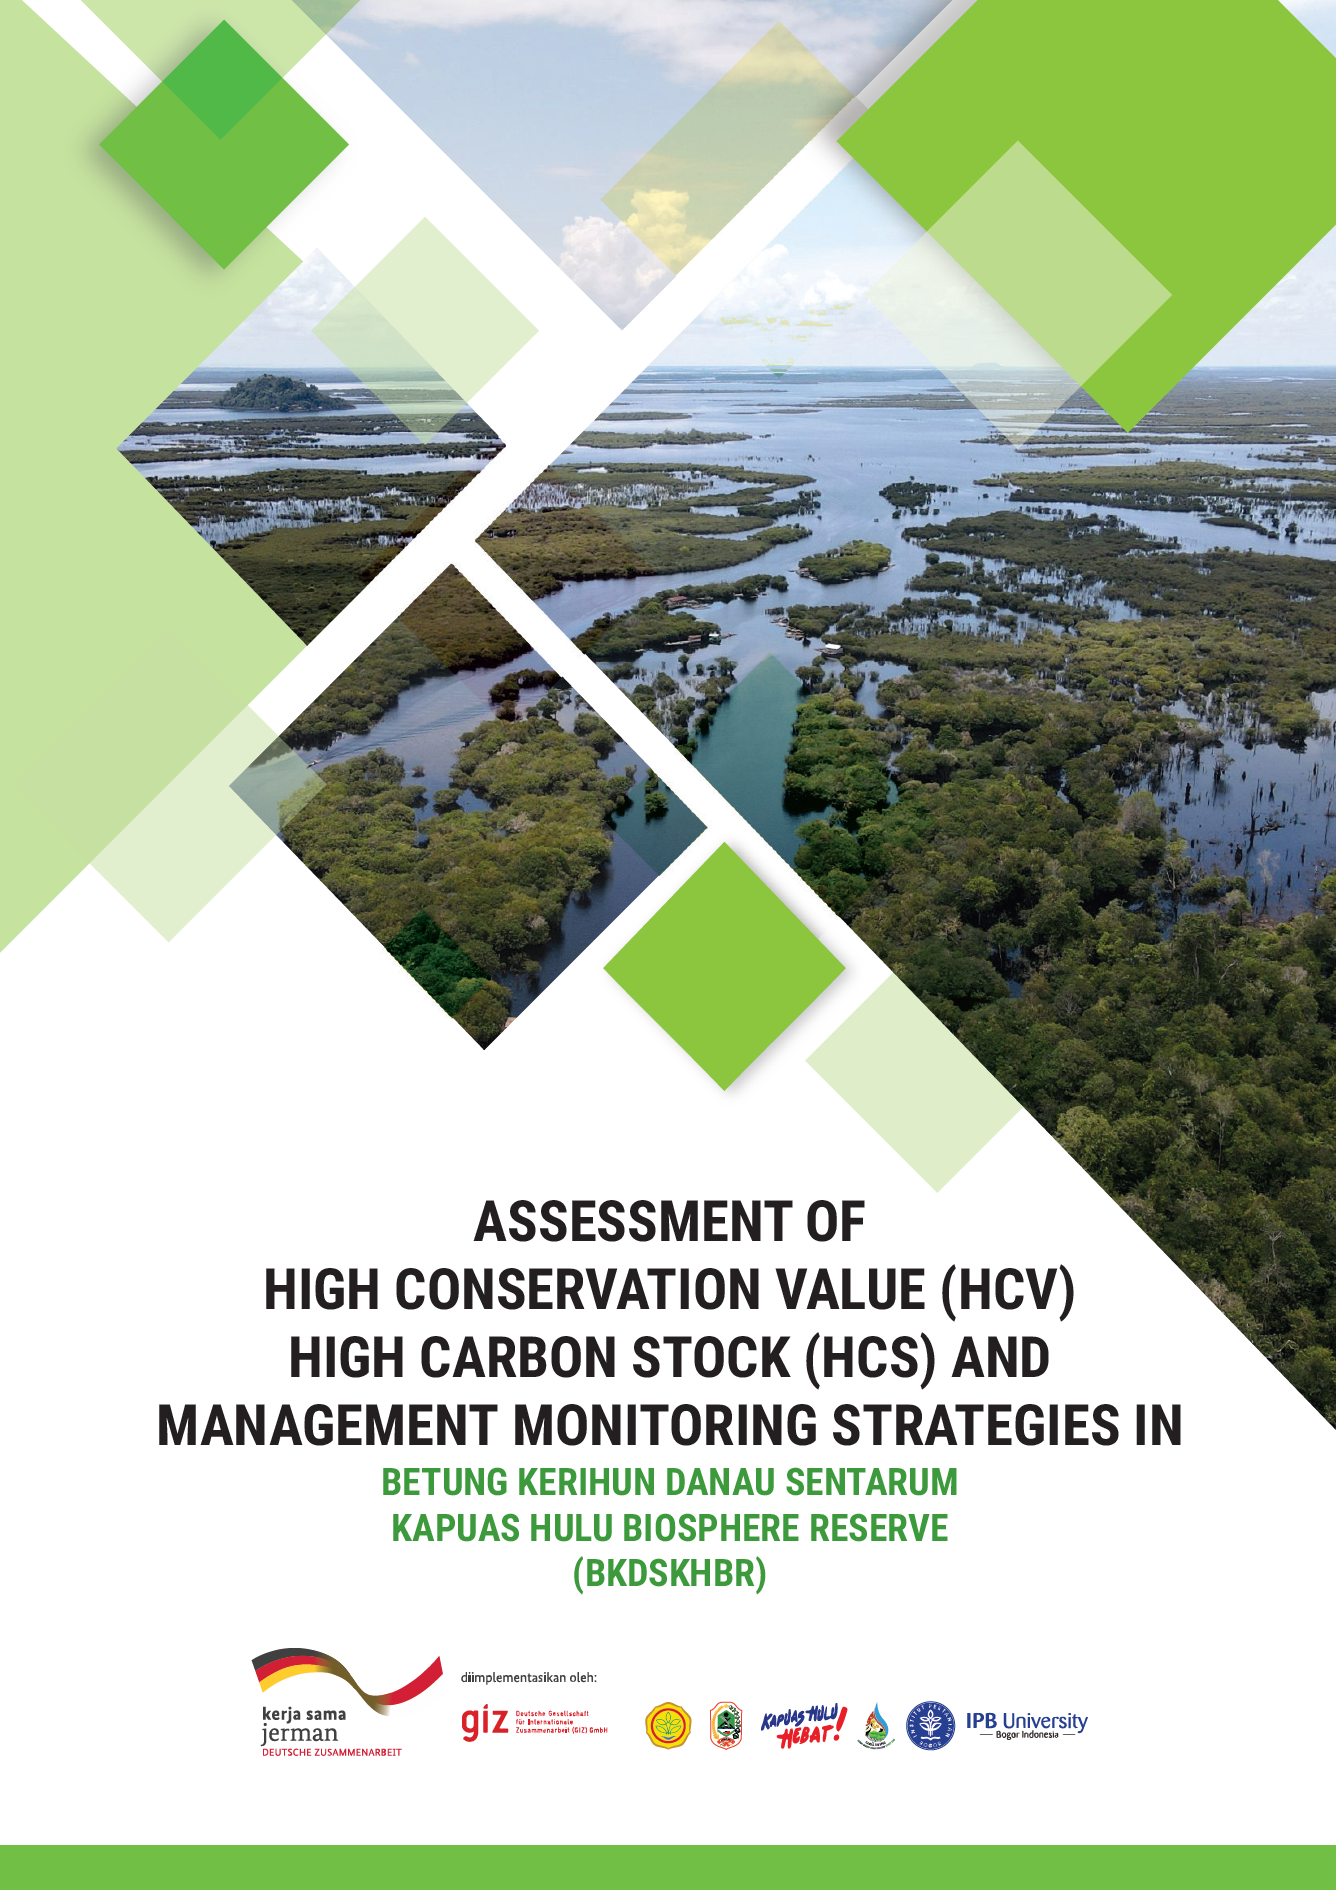 Assessment of High Conservation Value (HCV) High Carbon Stock (HCS) and Management Monitoring Strategies in Kapuas Hulu Biosphere Reserve